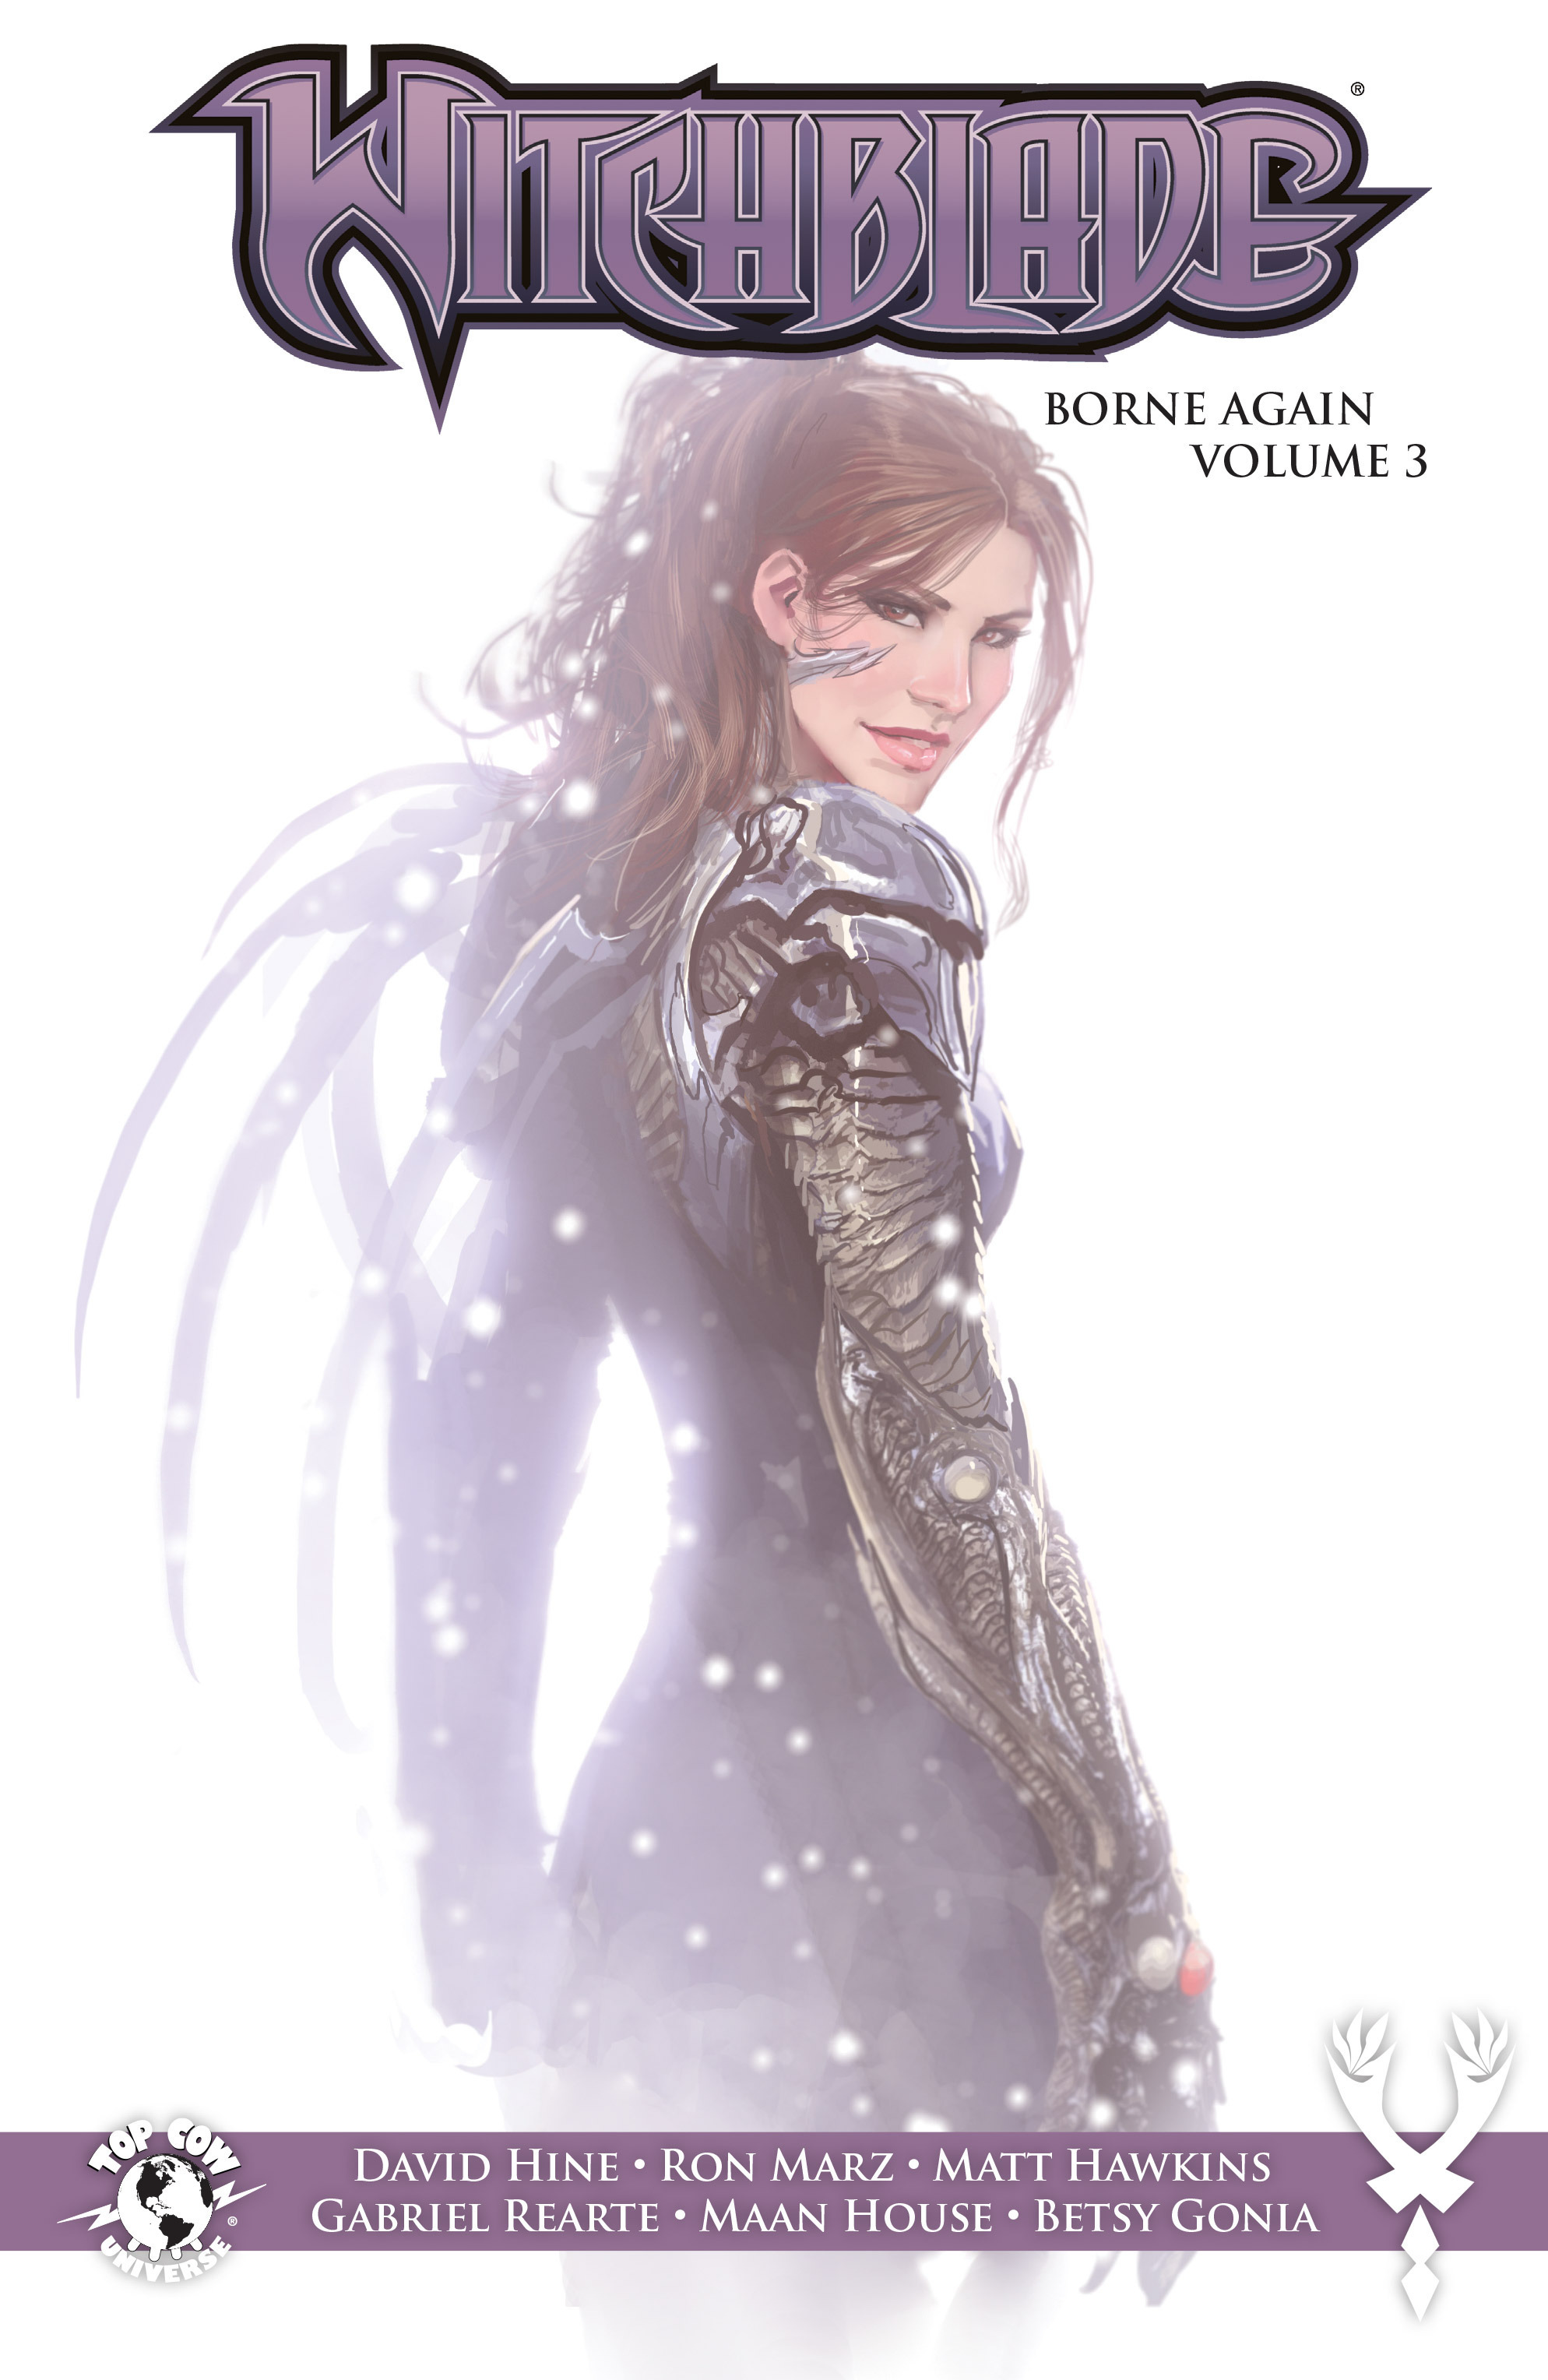 Read online Witchblade: Borne Again comic -  Issue # TPB 3 - 1